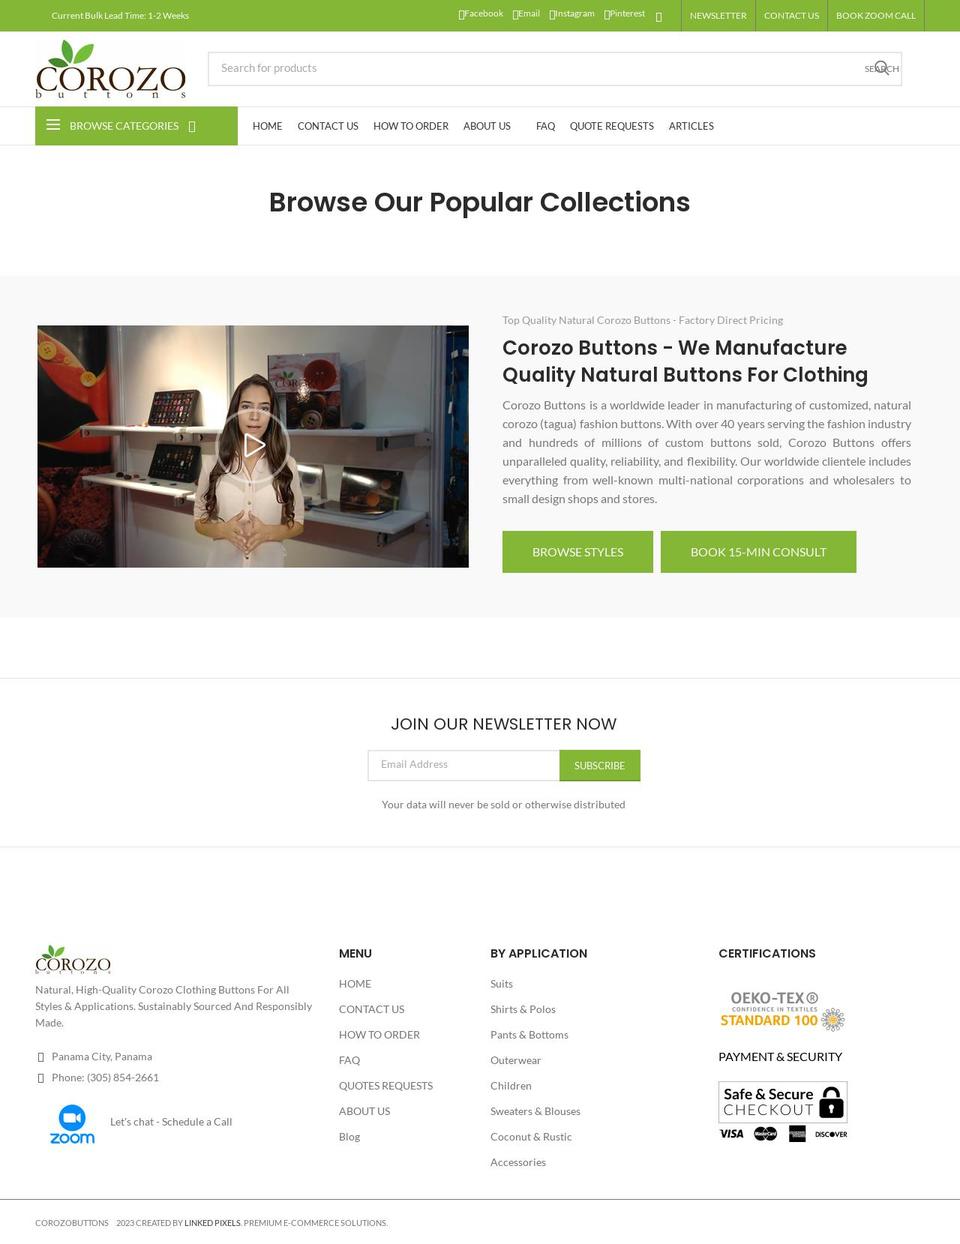 Woodmart Shopify theme site example corozobuttons.com